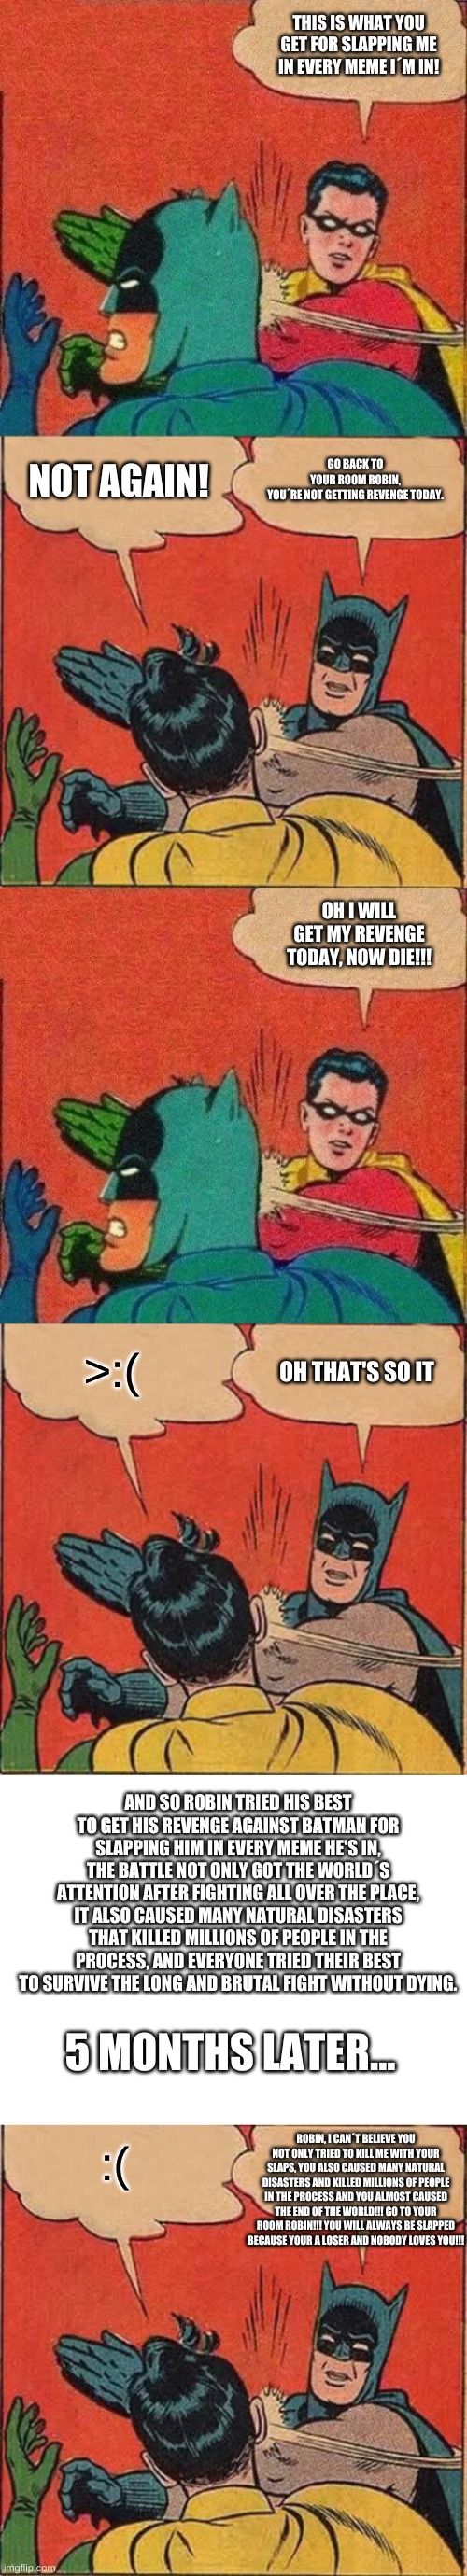 How Robin almost got his revenge | THIS IS WHAT YOU GET FOR SLAPPING ME IN EVERY MEME I´M IN! GO BACK TO YOUR ROOM ROBIN, YOU´RE NOT GETTING REVENGE TODAY. NOT AGAIN! OH I WILL GET MY REVENGE TODAY, NOW DIE!!! OH THAT'S SO IT; >:(; AND SO ROBIN TRIED HIS BEST TO GET HIS REVENGE AGAINST BATMAN FOR SLAPPING HIM IN EVERY MEME HE'S IN, THE BATTLE NOT ONLY GOT THE WORLD´S ATTENTION AFTER FIGHTING ALL OVER THE PLACE, IT ALSO CAUSED MANY NATURAL DISASTERS THAT KILLED MILLIONS OF PEOPLE IN THE PROCESS, AND EVERYONE TRIED THEIR BEST TO SURVIVE THE LONG AND BRUTAL FIGHT WITHOUT DYING. 5 MONTHS LATER... :(; ROBIN, I CAN´T BELIEVE YOU NOT ONLY TRIED TO KILL ME WITH YOUR SLAPS, YOU ALSO CAUSED MANY NATURAL DISASTERS AND KILLED MILLIONS OF PEOPLE IN THE PROCESS AND YOU ALMOST CAUSED THE END OF THE WORLD!!! GO TO YOUR ROOM ROBIN!!! YOU WILL ALWAYS BE SLAPPED BECAUSE YOUR A LOSER AND NOBODY LOVES YOU!!! | image tagged in batman slapping robin,robin slaps batman | made w/ Imgflip meme maker